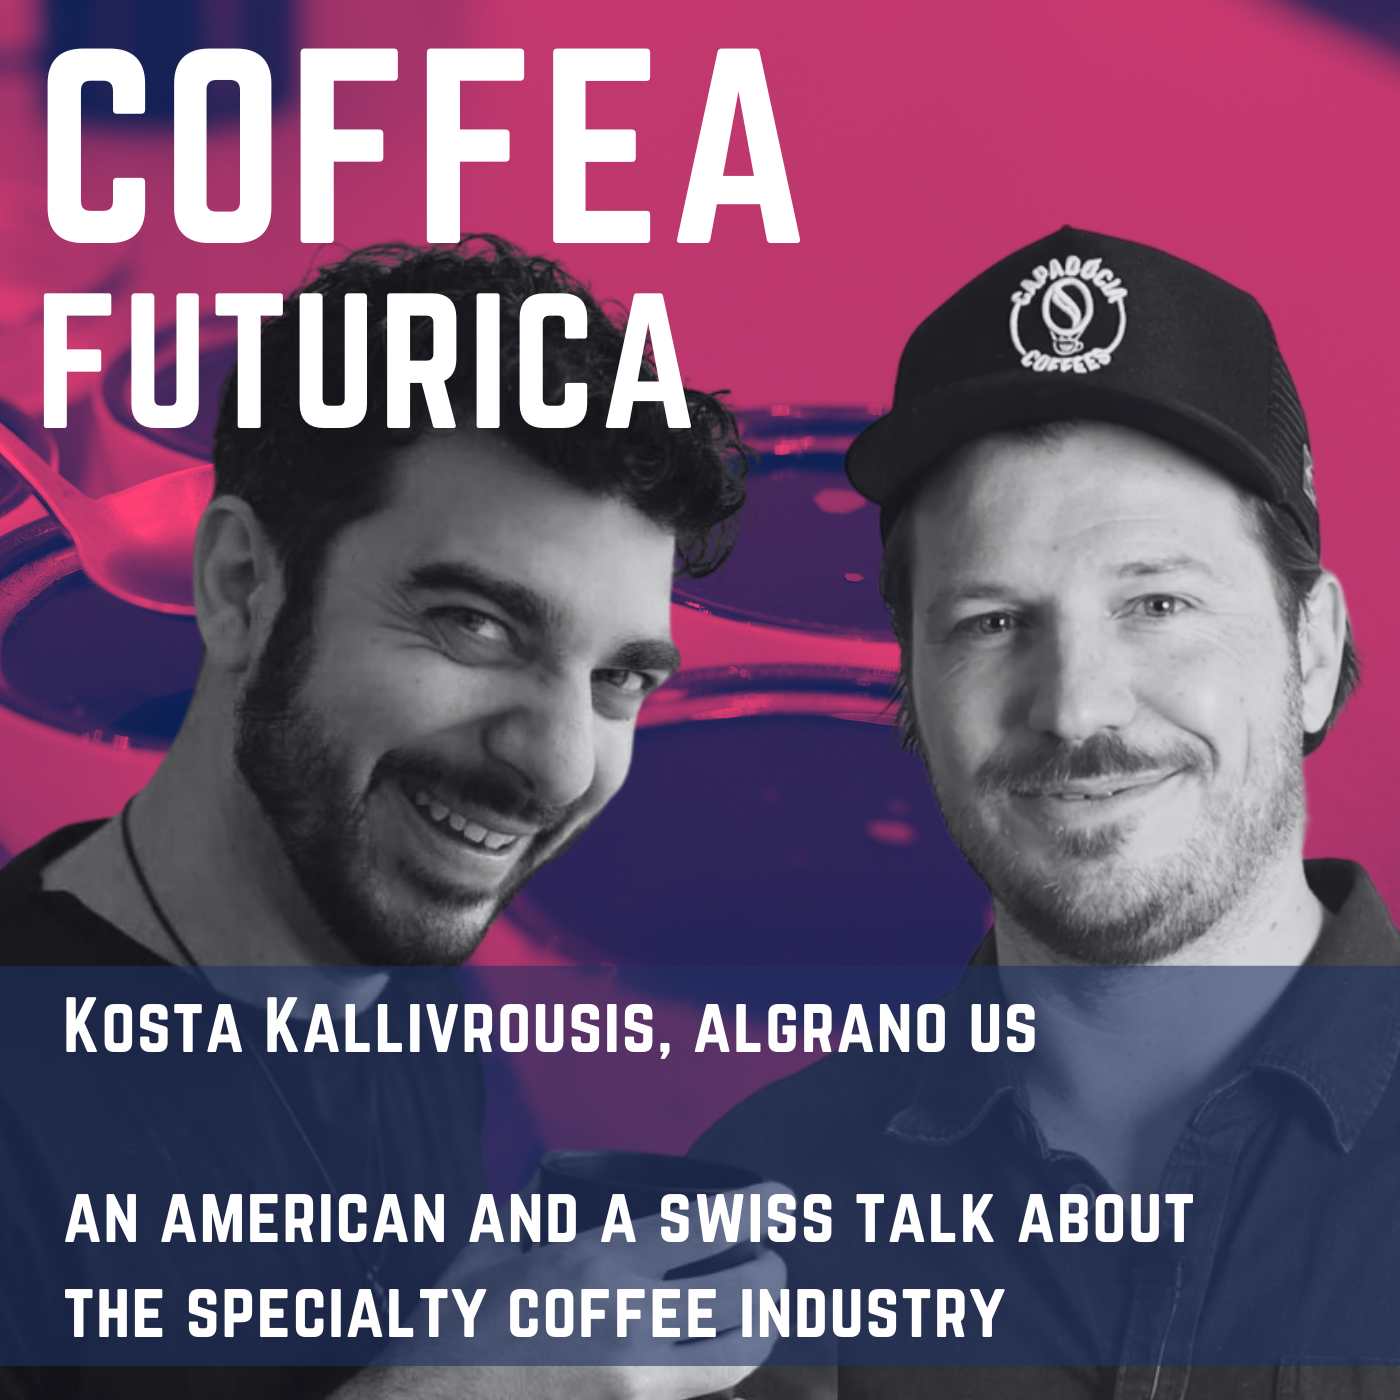 An American and a Swiss talk about the Specialty Coffee Industry